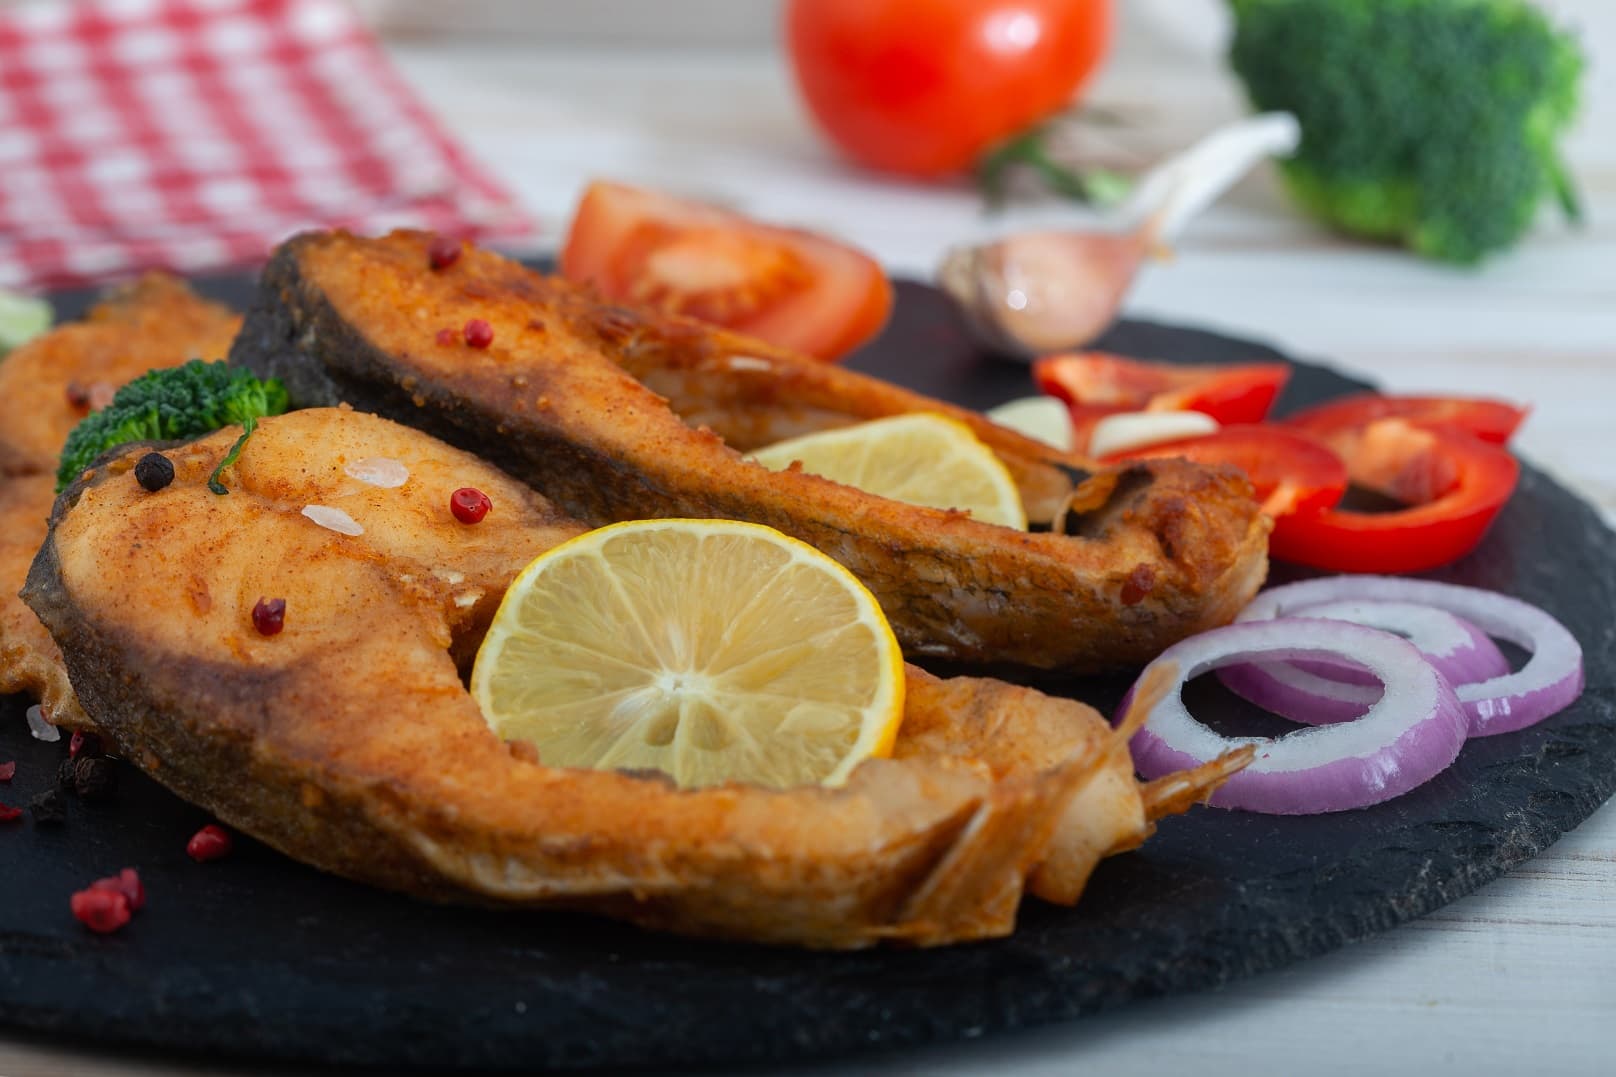 Fried carp fish slices on a black plate.  Fried golden crust fish fillets with  lemon and vegetables.